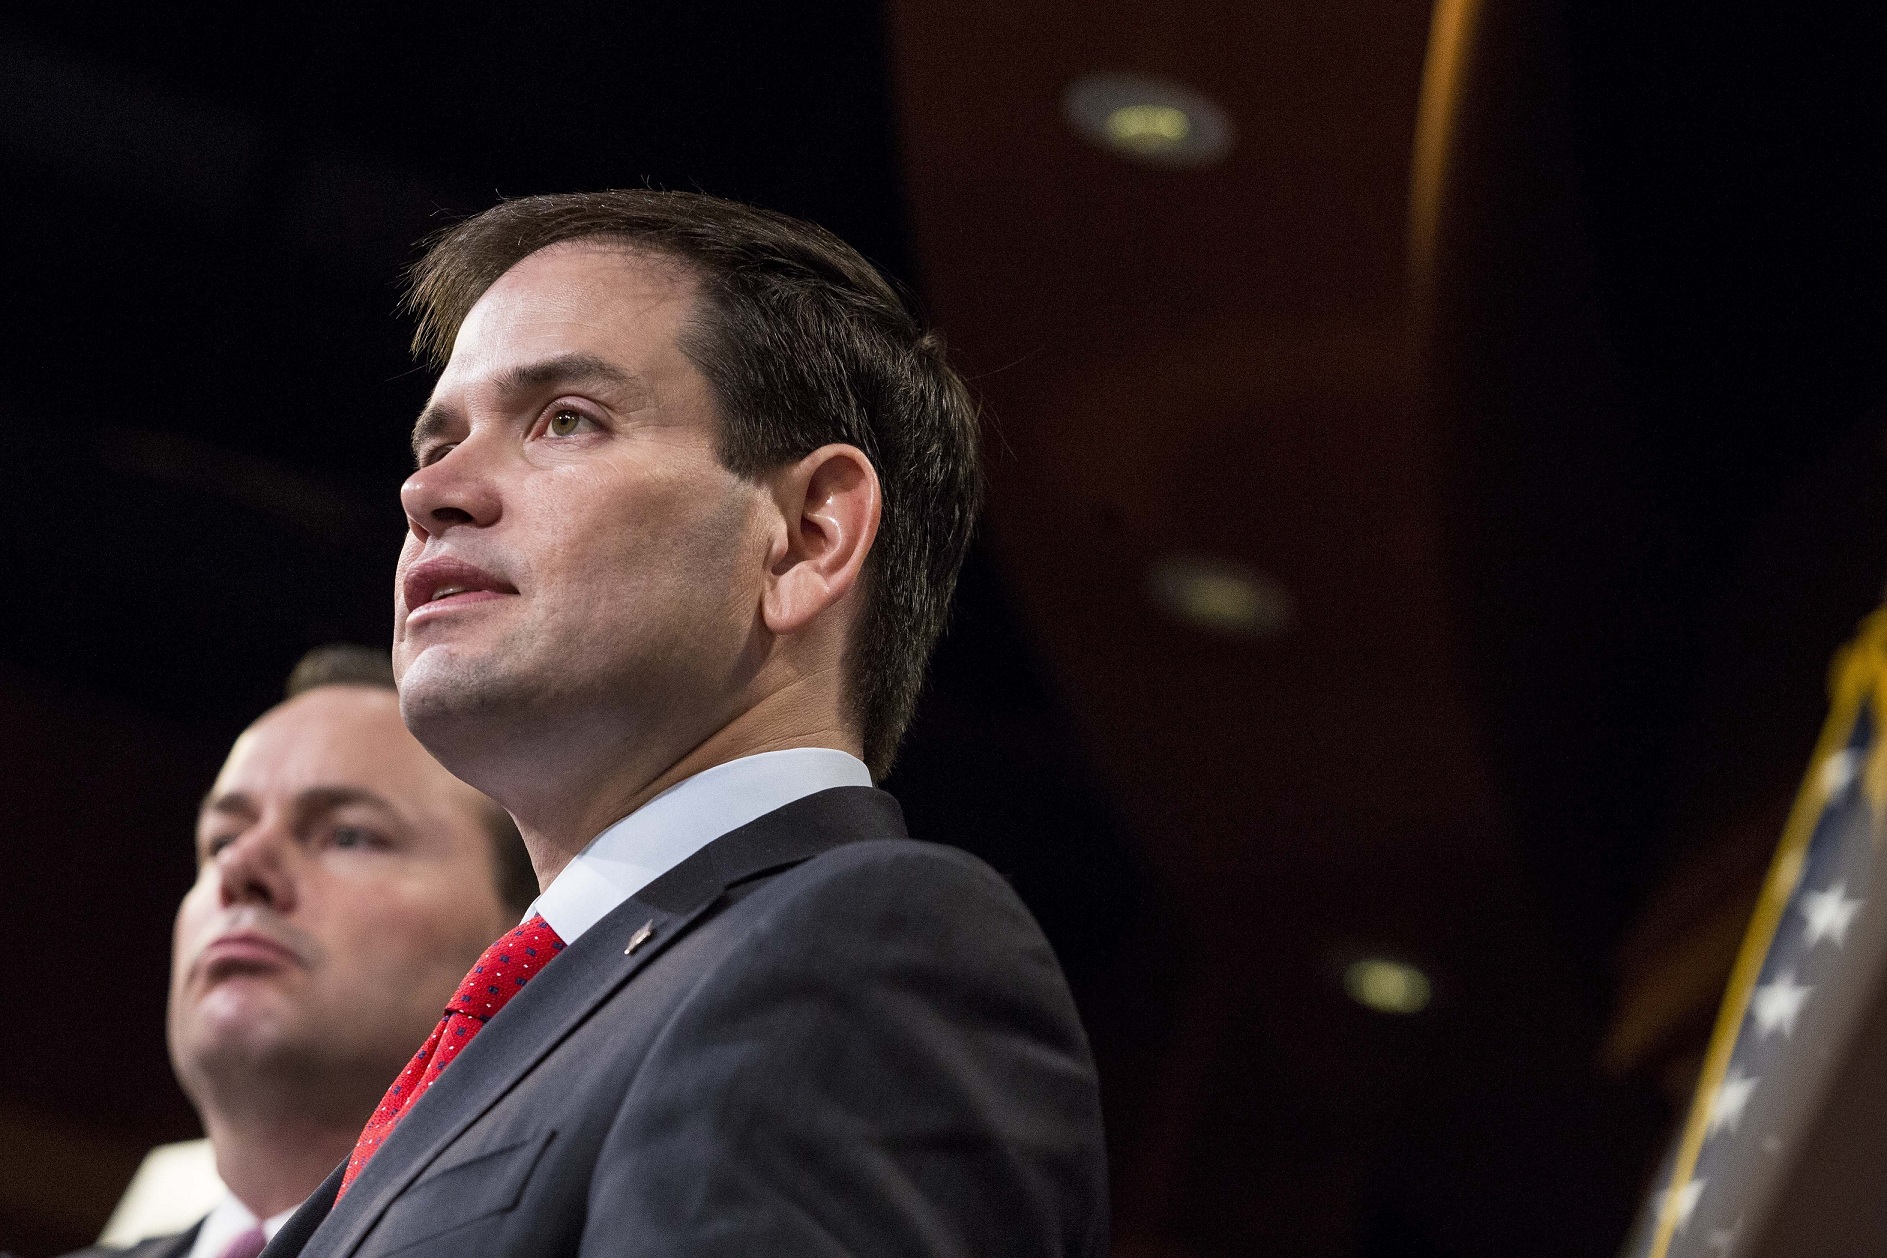 WASHINGTON, DC - MARCH 4, 2015: Senators Marco Rubio (R-FL) and Mike Lee (R-Utah) during a news conference to introduce their proposal for an overhaul of the tax code, on Capitol Hill in Washington, March 4, 2015. One part of their plan proposes to reduce seven tax brackets for income tax to two: 15 percent and 35 percent.
